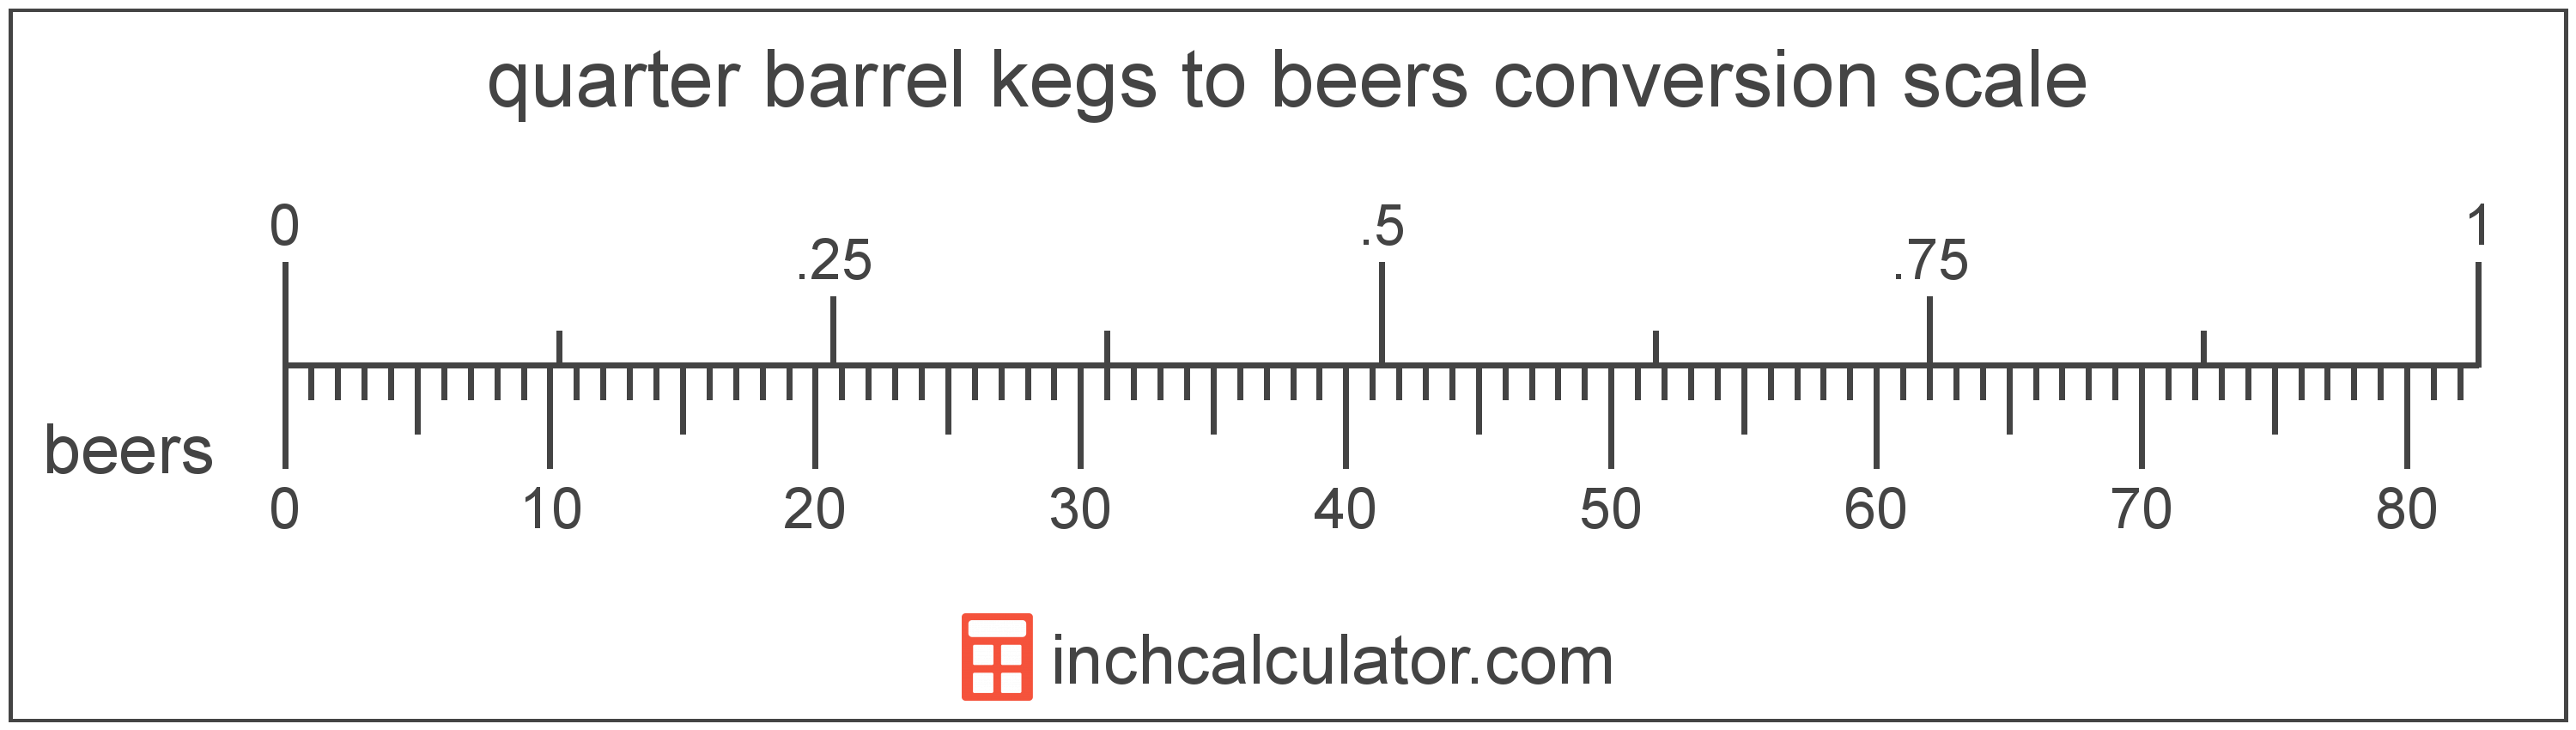 conversion scale showing beers and equivalent quarter barrel kegs beer volume values